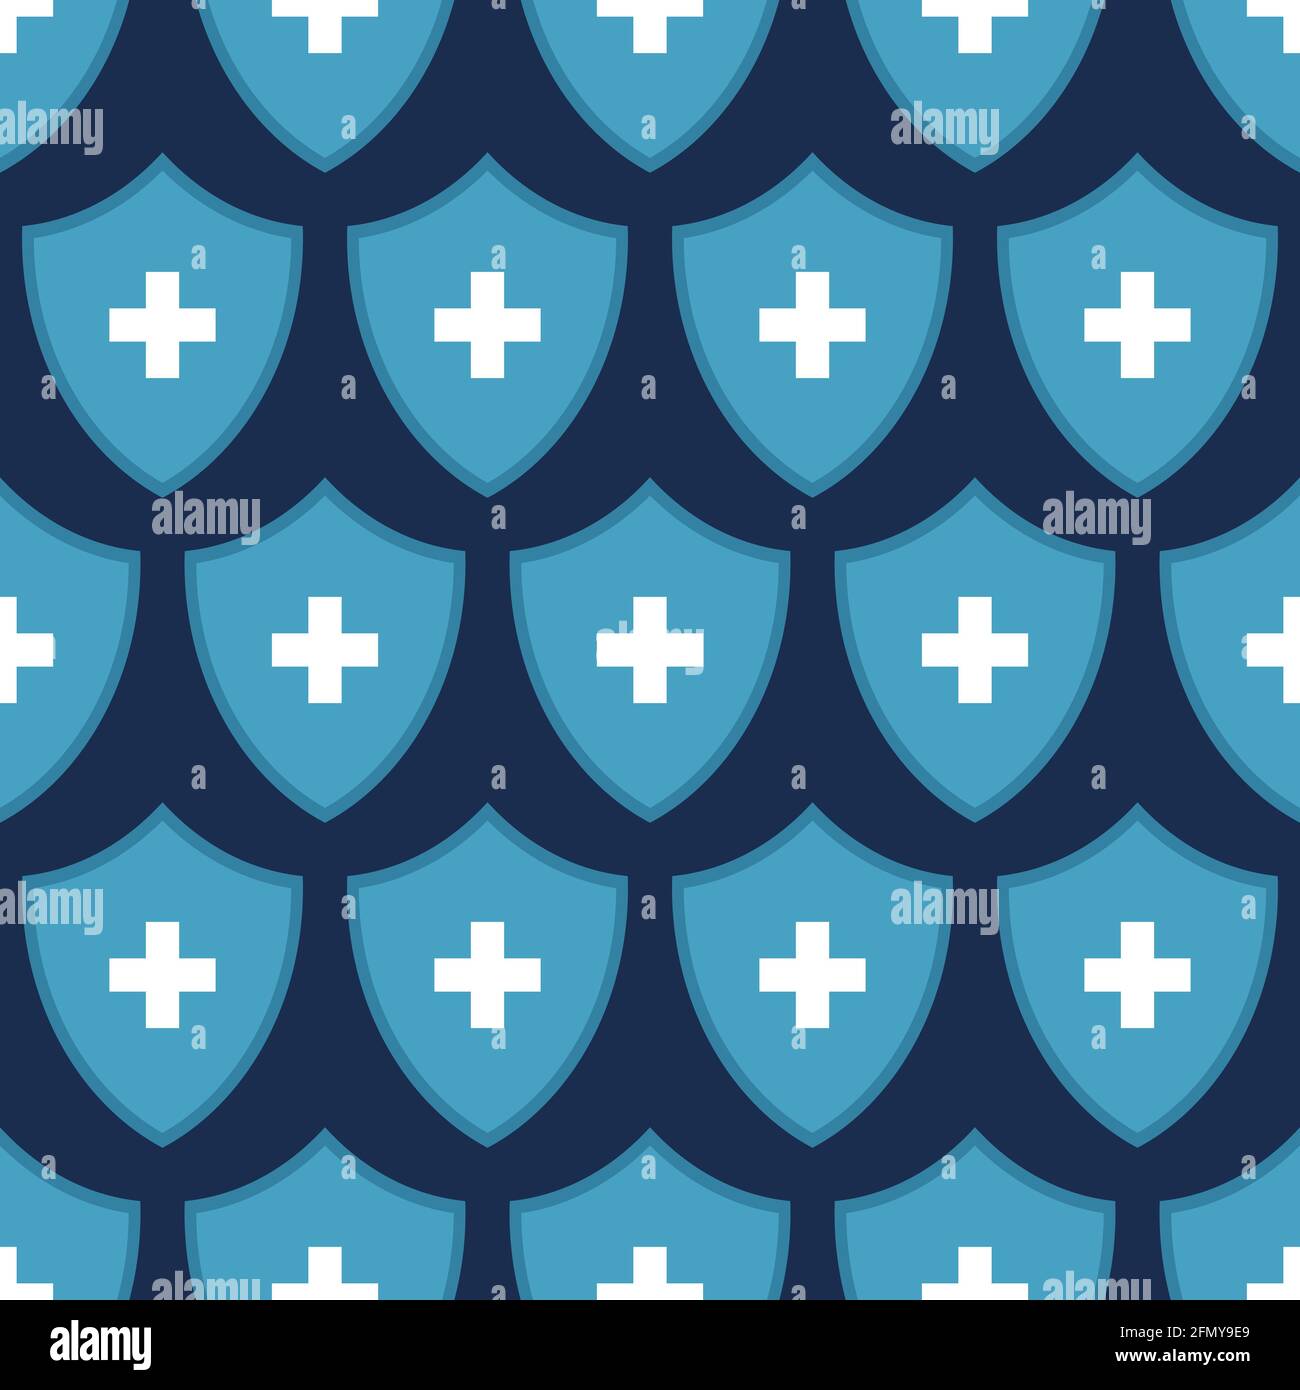 Seamless vector pattern of blue shields with white crosses, isolated on dark background. Health protection concept. Shield icon for health. Stock Vector